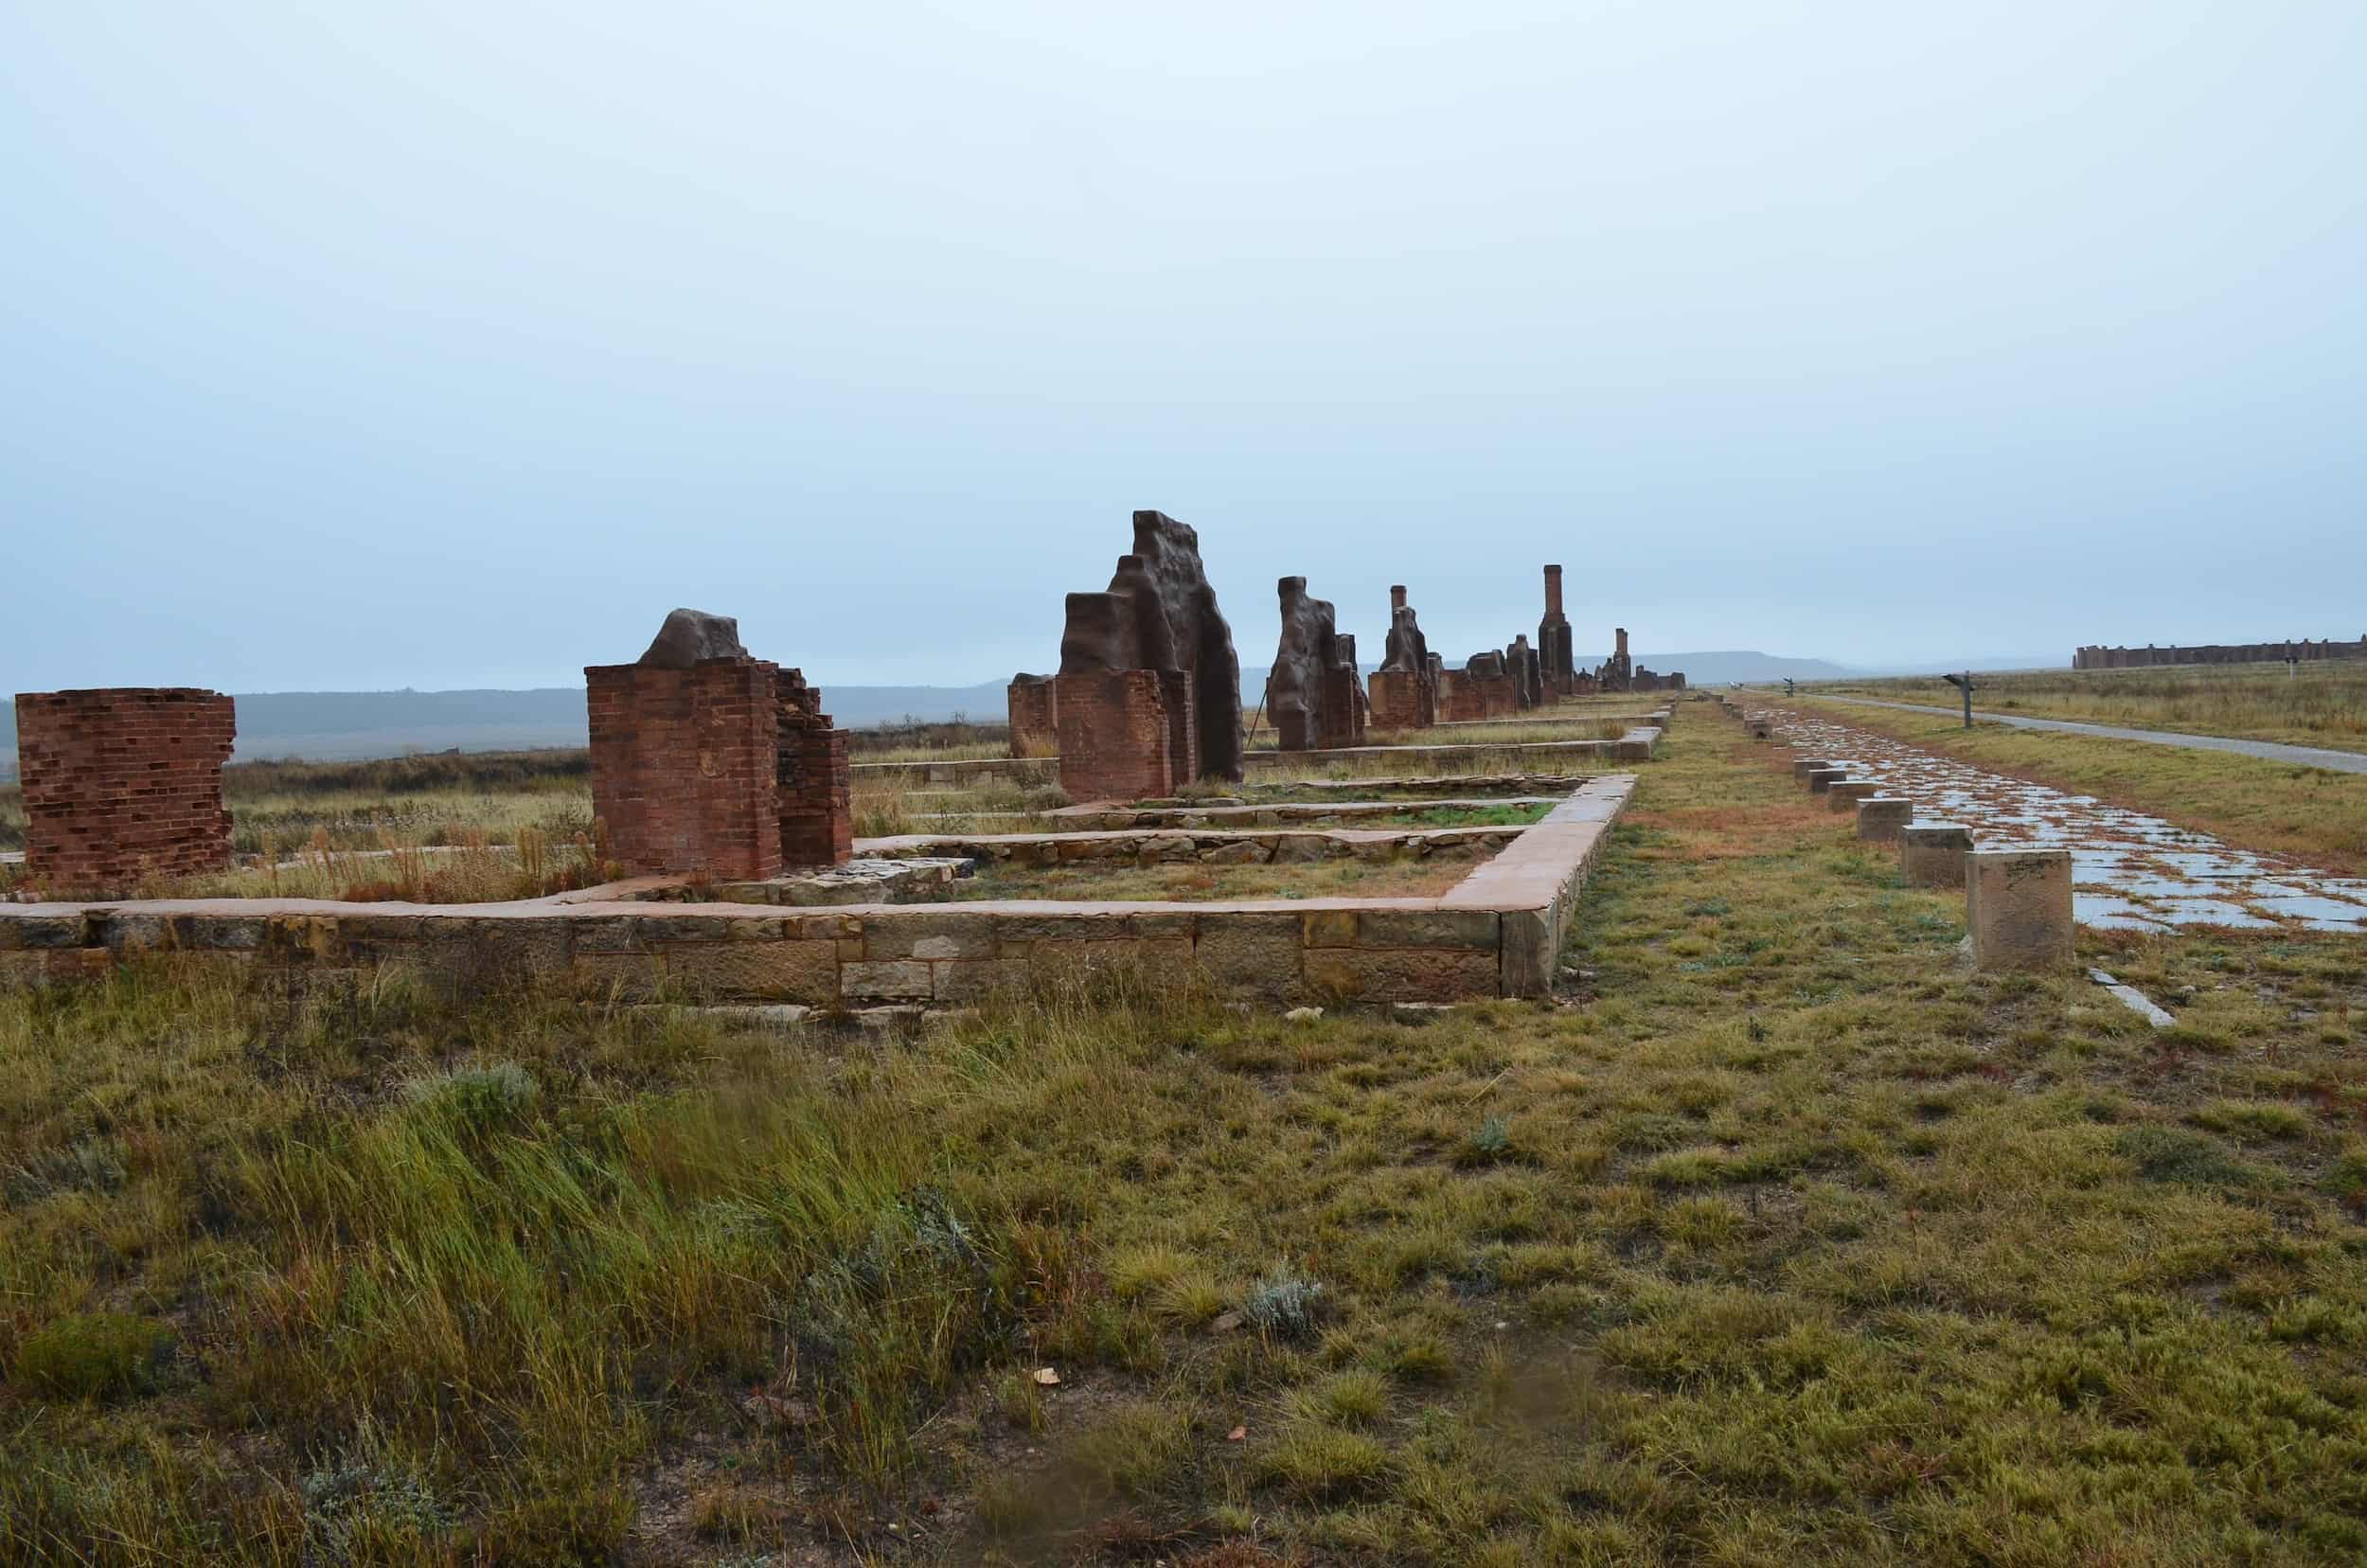 Officers' Row at Fort Union National Monument in New Mexico